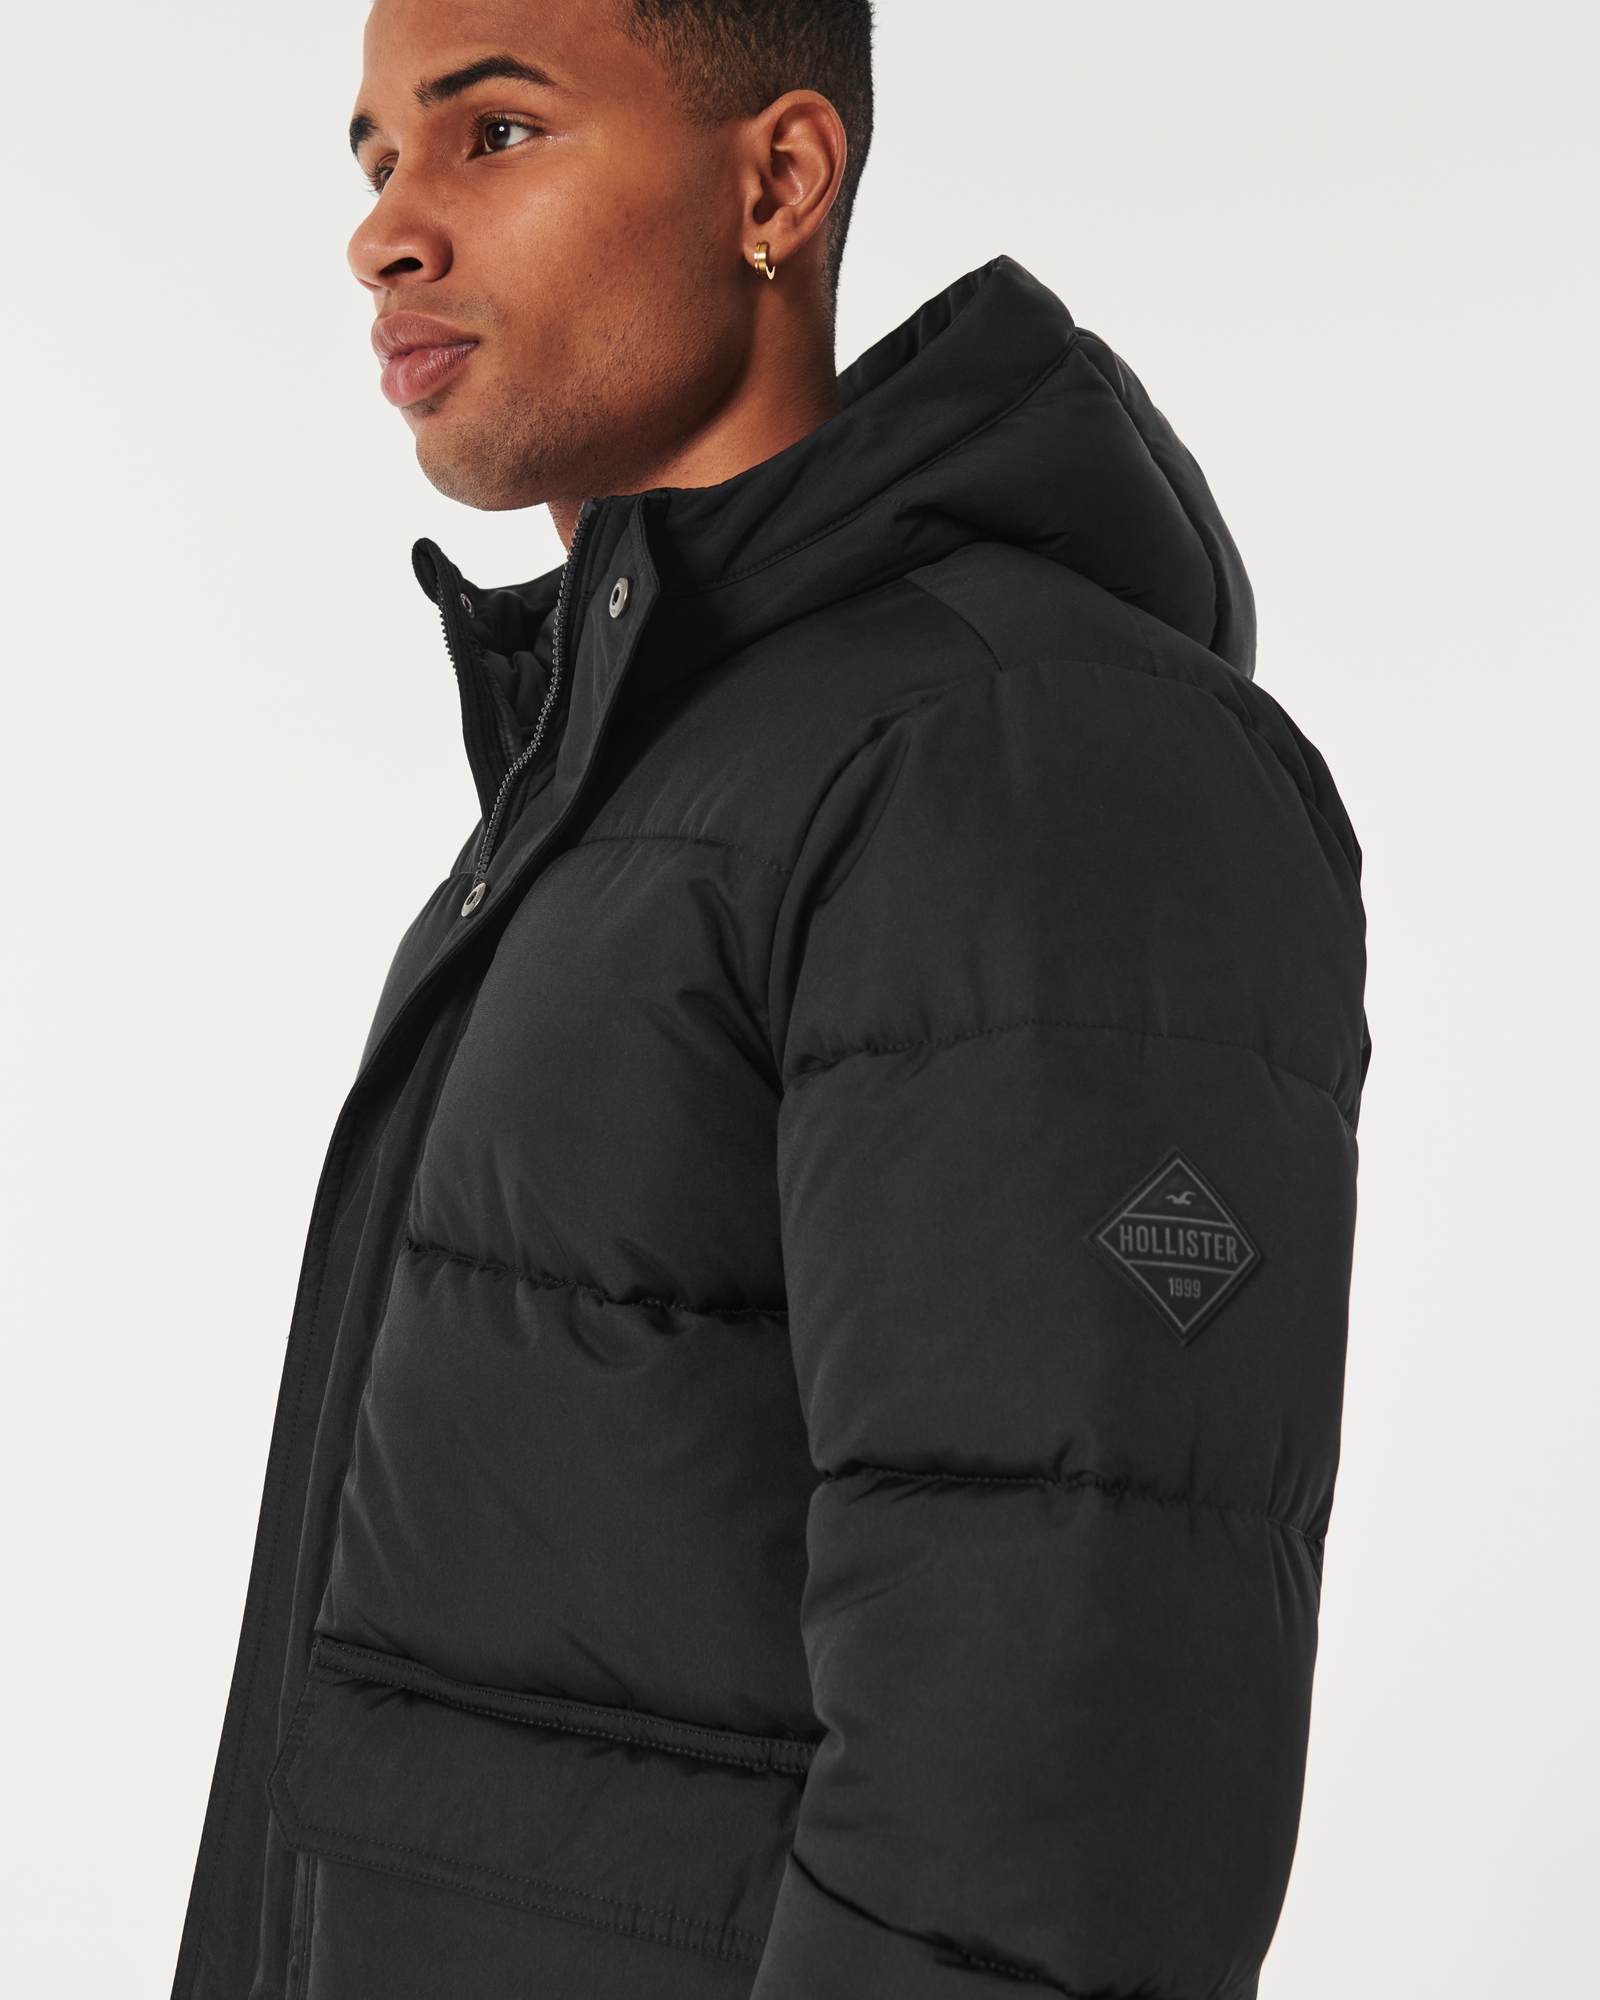 Hollister puffer jacket, Men's Fashion, Coats, Jackets and